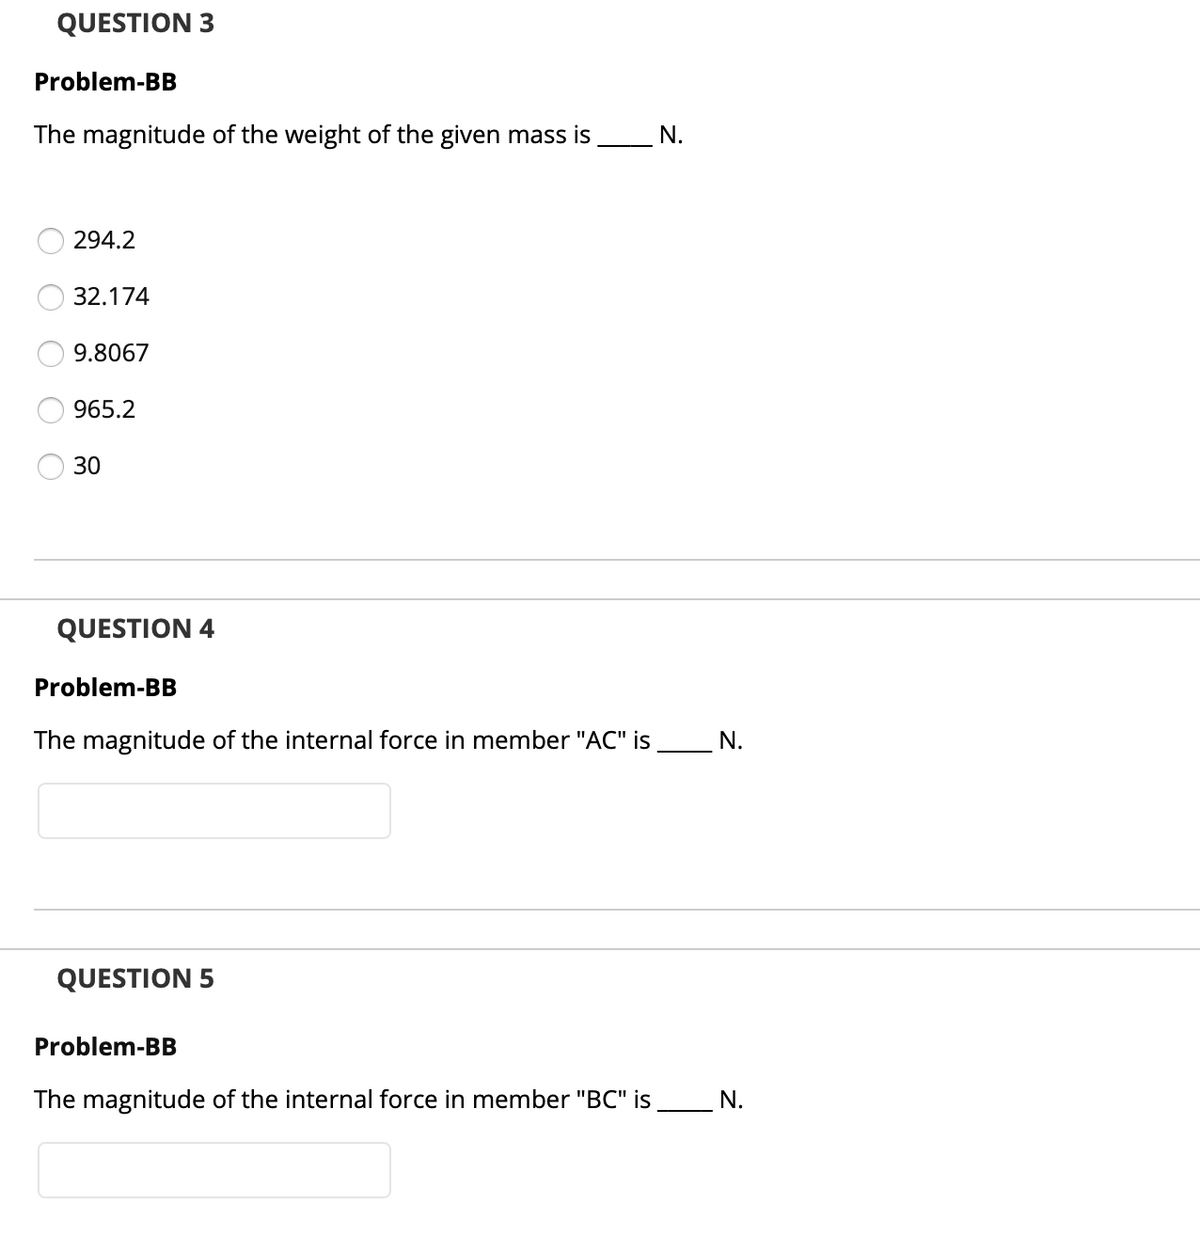 QUESTION 3
Problem-BB
The magnitude of the weight of the given mass is
N.
294.2
32.174
9.8067
965.2
30
QUESTION 4
Problem-BB
The magnitude of the internal force in member "AC" is
N.
QUESTION 5
Problem-BB
The magnitude of the internal force in member "BC" is
N.
O O O O
